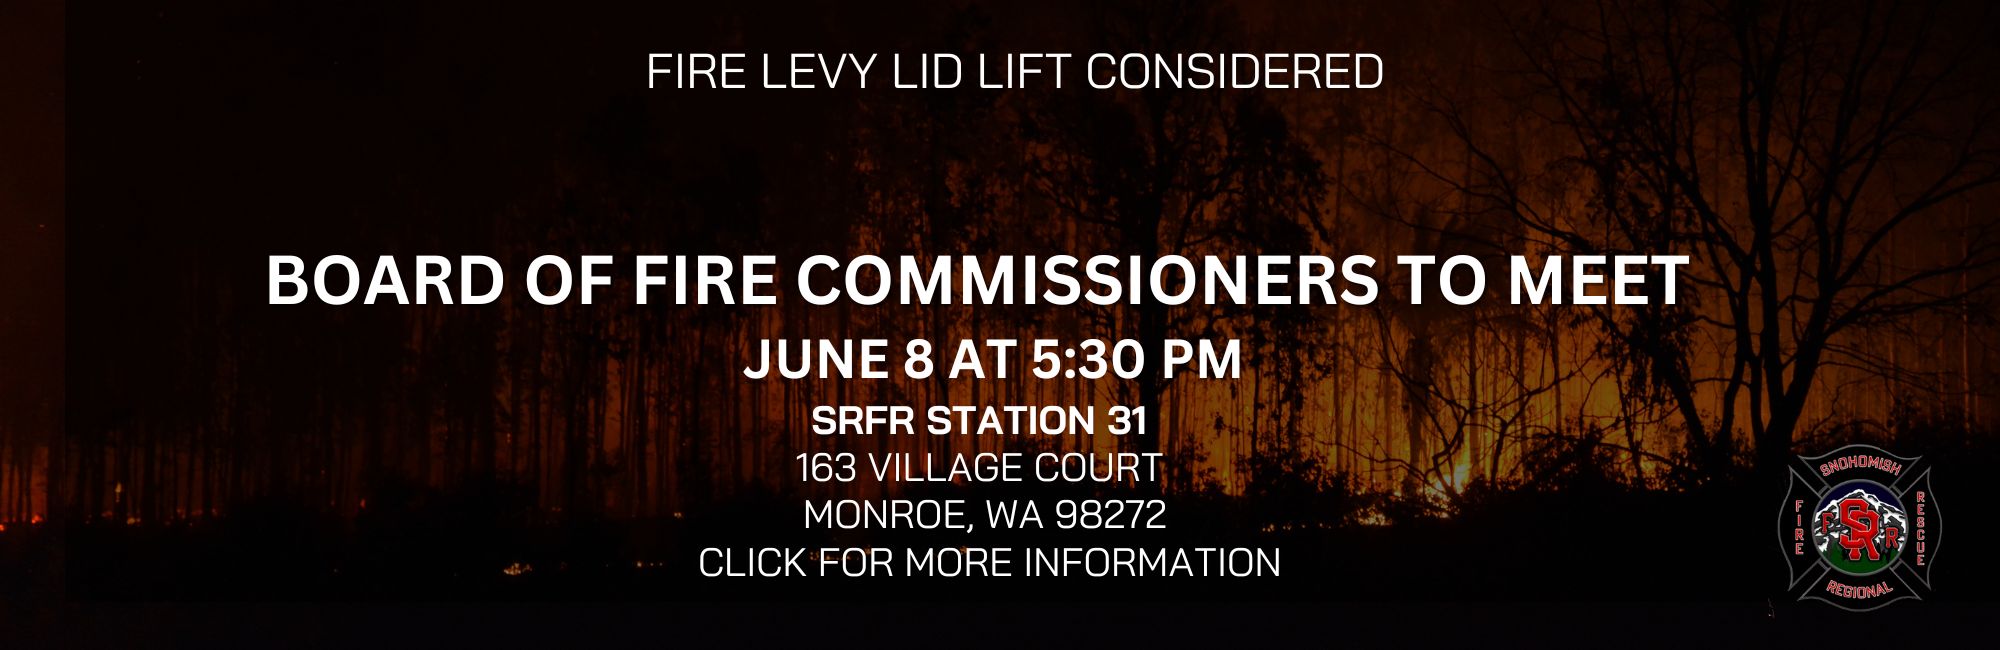 Fire Levy Lid Lift Information